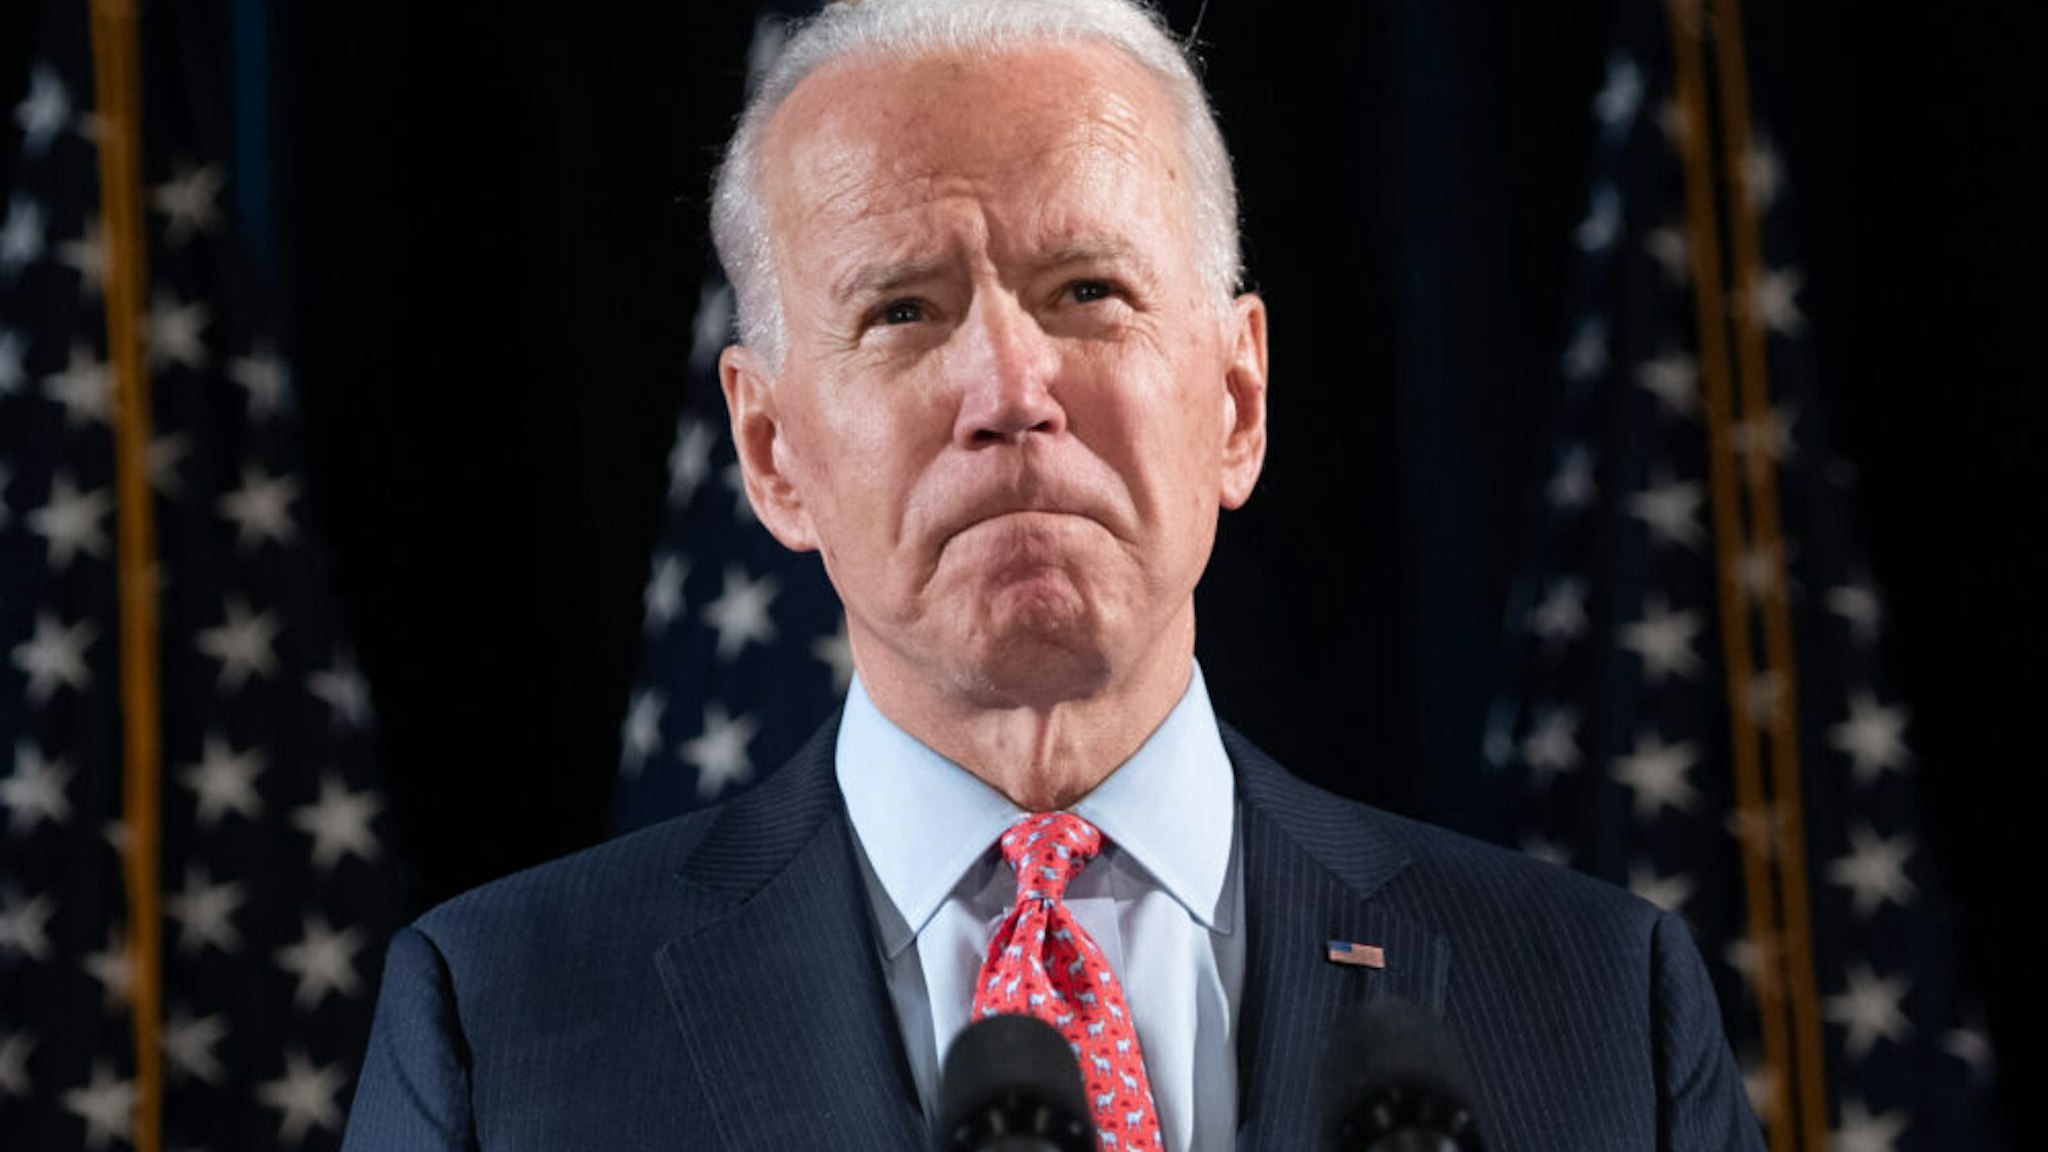 Former US Vice President and Democratic presidential hopeful Joe Biden speaks about COVID-19, known as the Coronavirus, during a press event in Wilmington, Delaware on March 12, 2020.